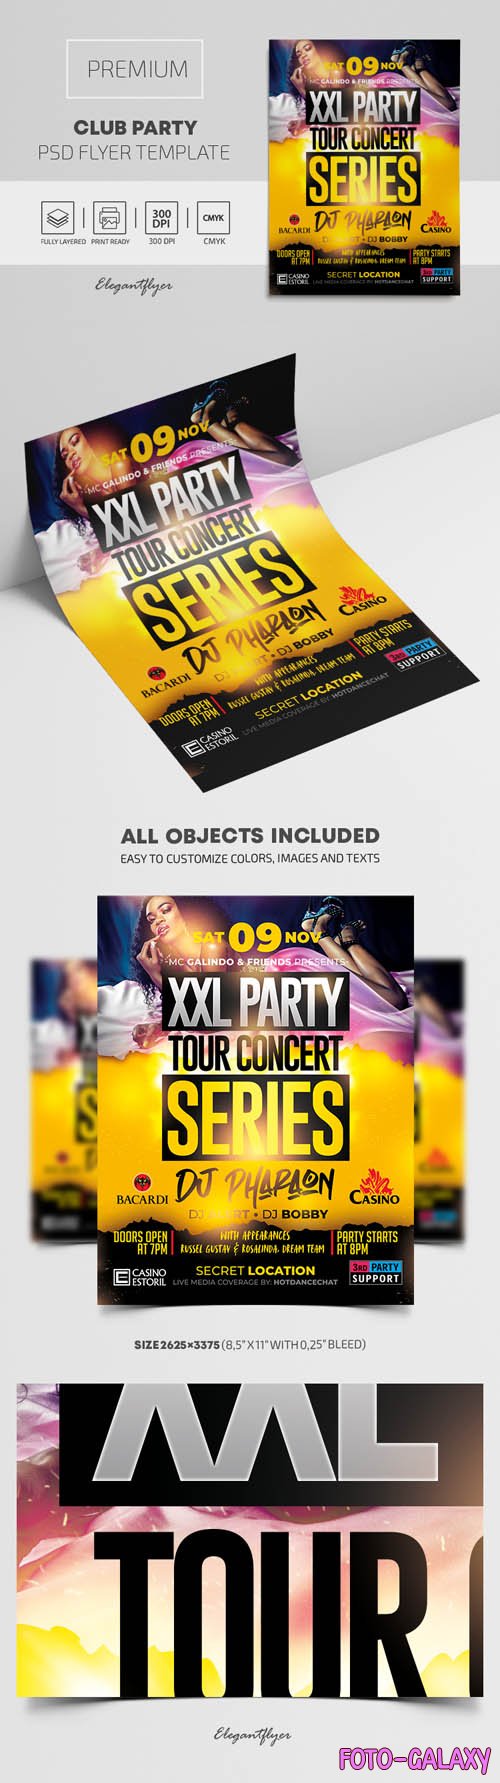 Club Party Premium PSD Flyer Template